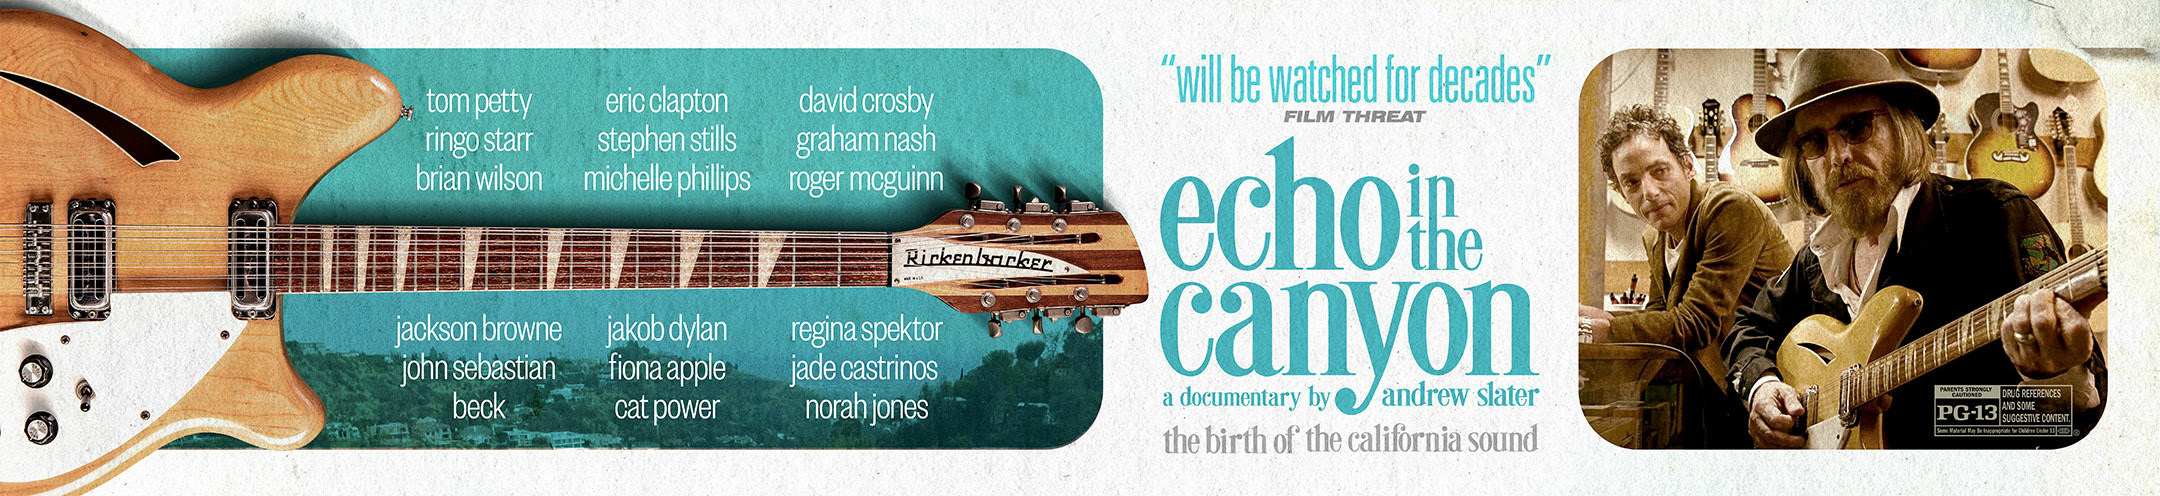 Mega Sized Movie Poster Image for Echo In the Canyon (#3 of 4)